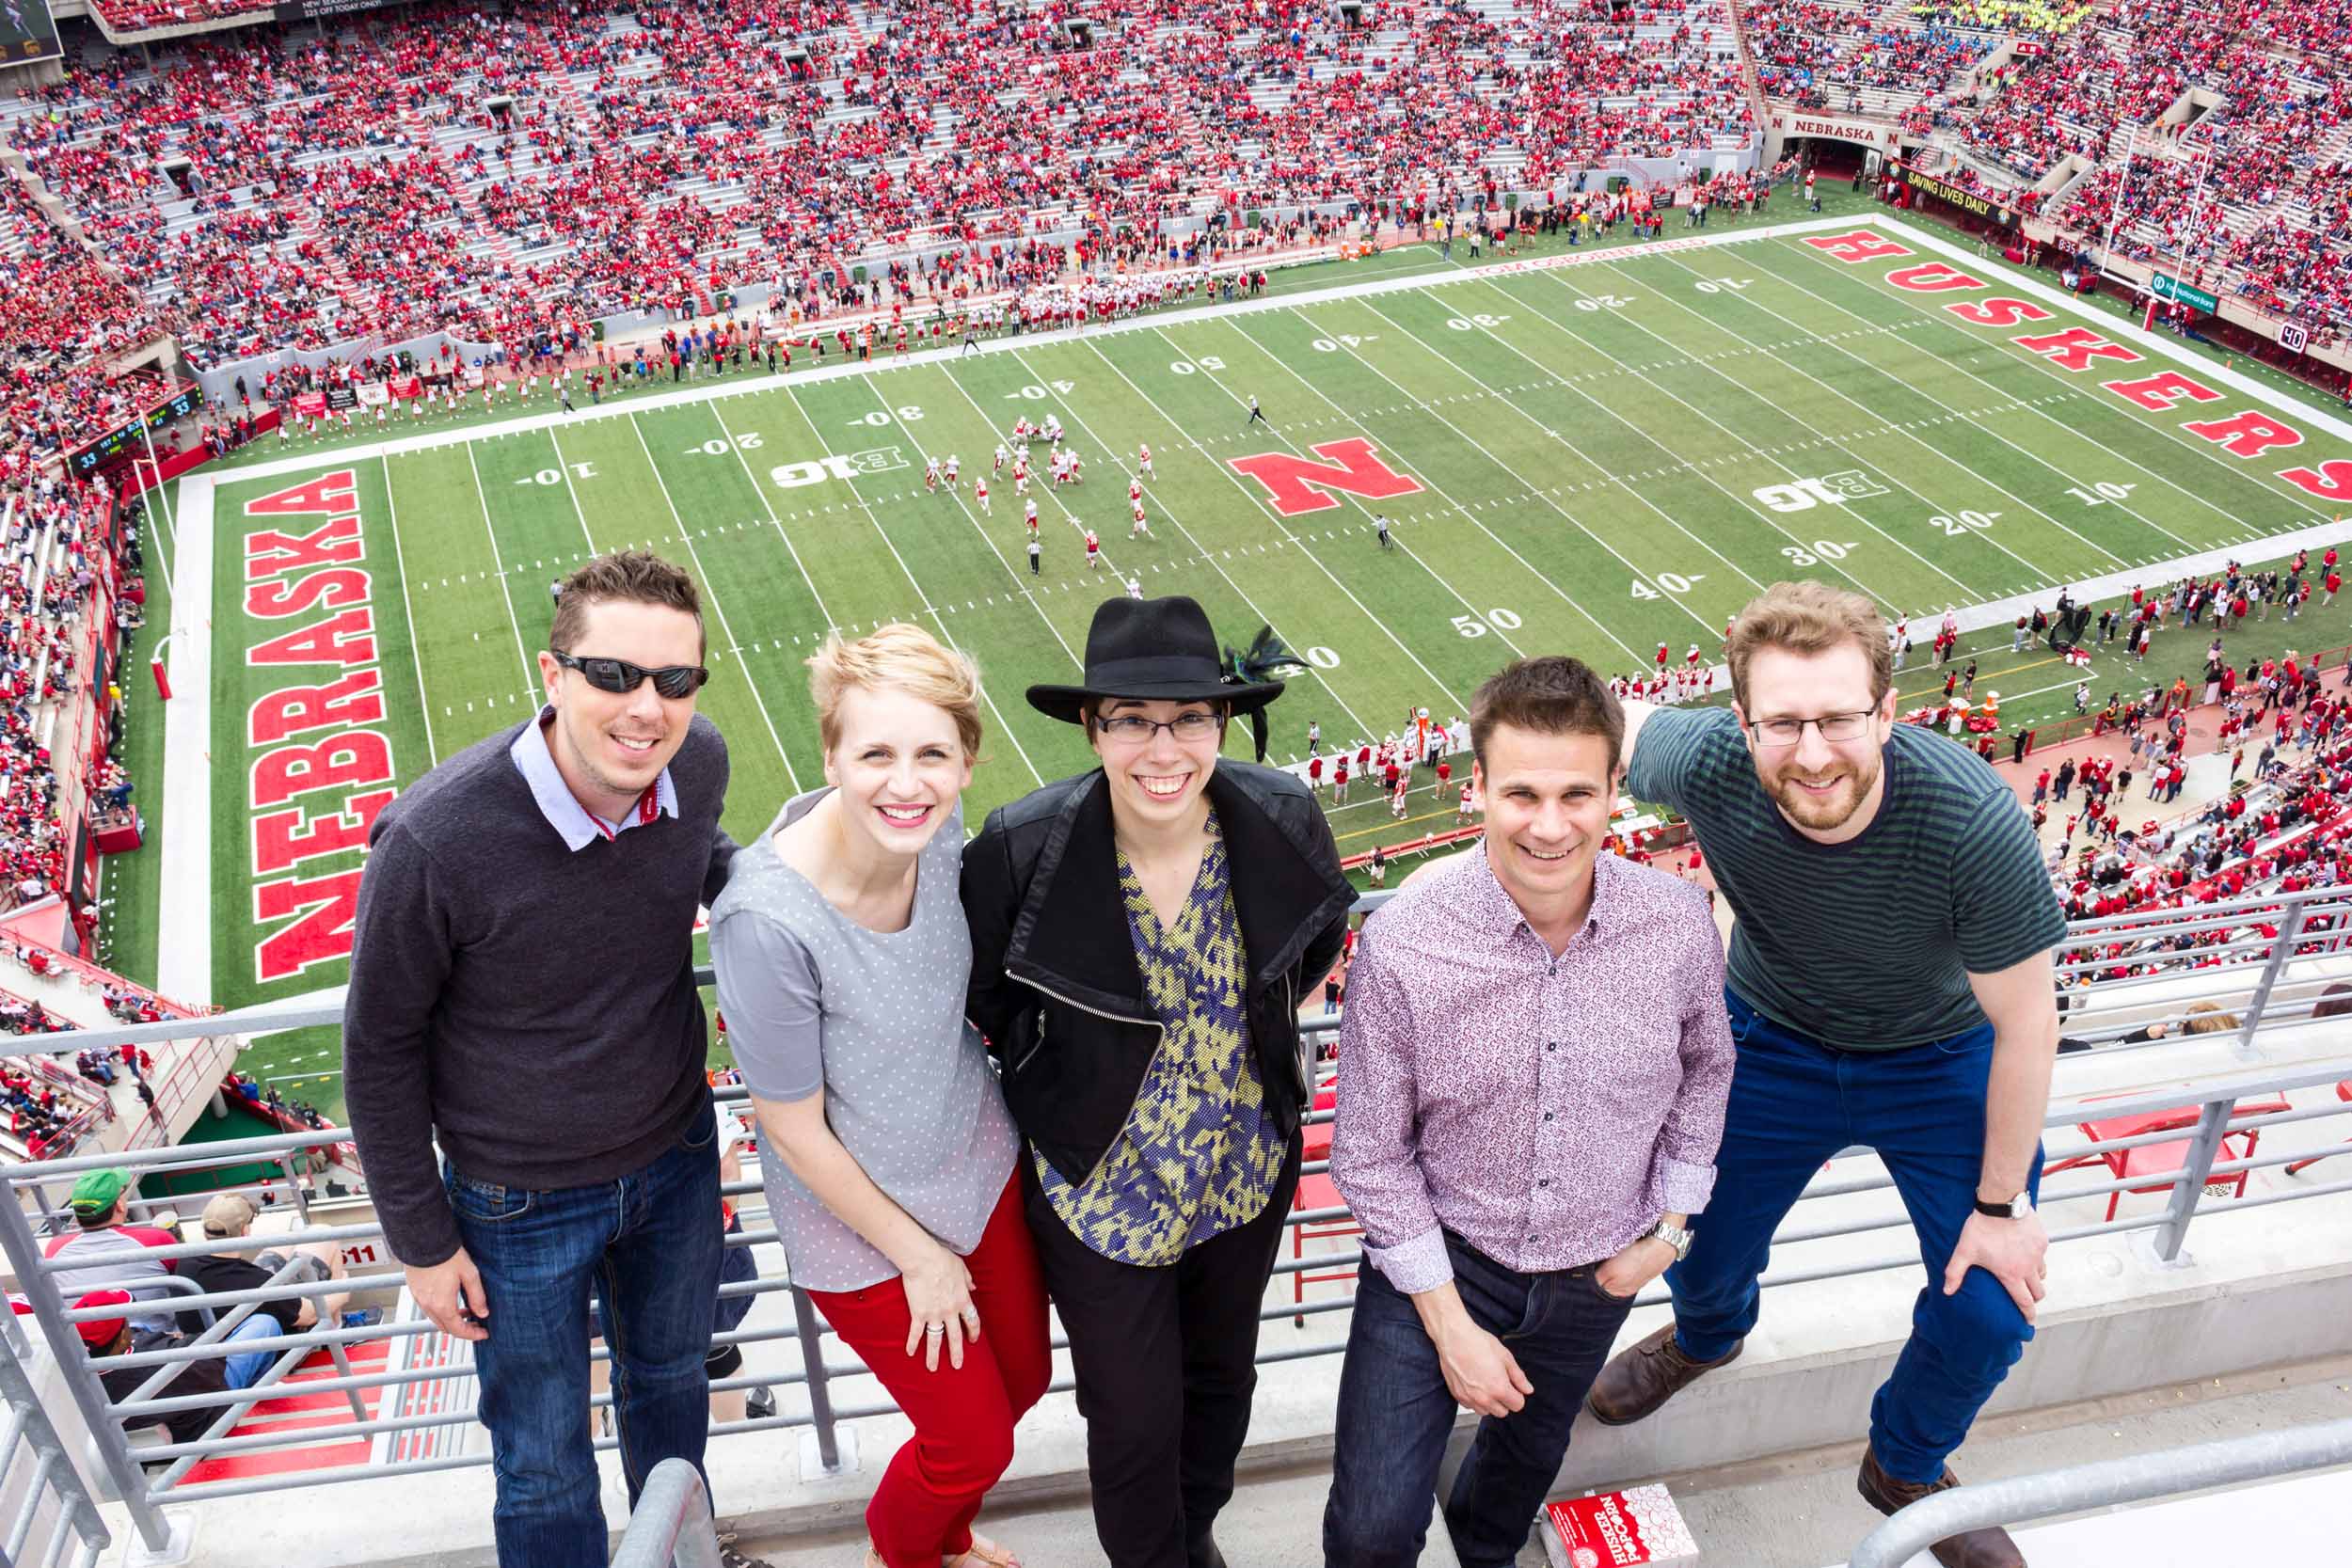 (From left) Livingstone Online team members Jared McDonald, Angela Aliff, Mary Borgo, and Justin Livingstone with friend of the project Jim Mussell (University of Leeds; foreground in purple shirt) at a Nebraska Huskers Red-White Spring Game, 2016. Copyright Angela Aliff. Creative Commons Attribution-NonCommercial 3.0 Unported (https://creativecommons.org/licenses/by-nc/3.0/).